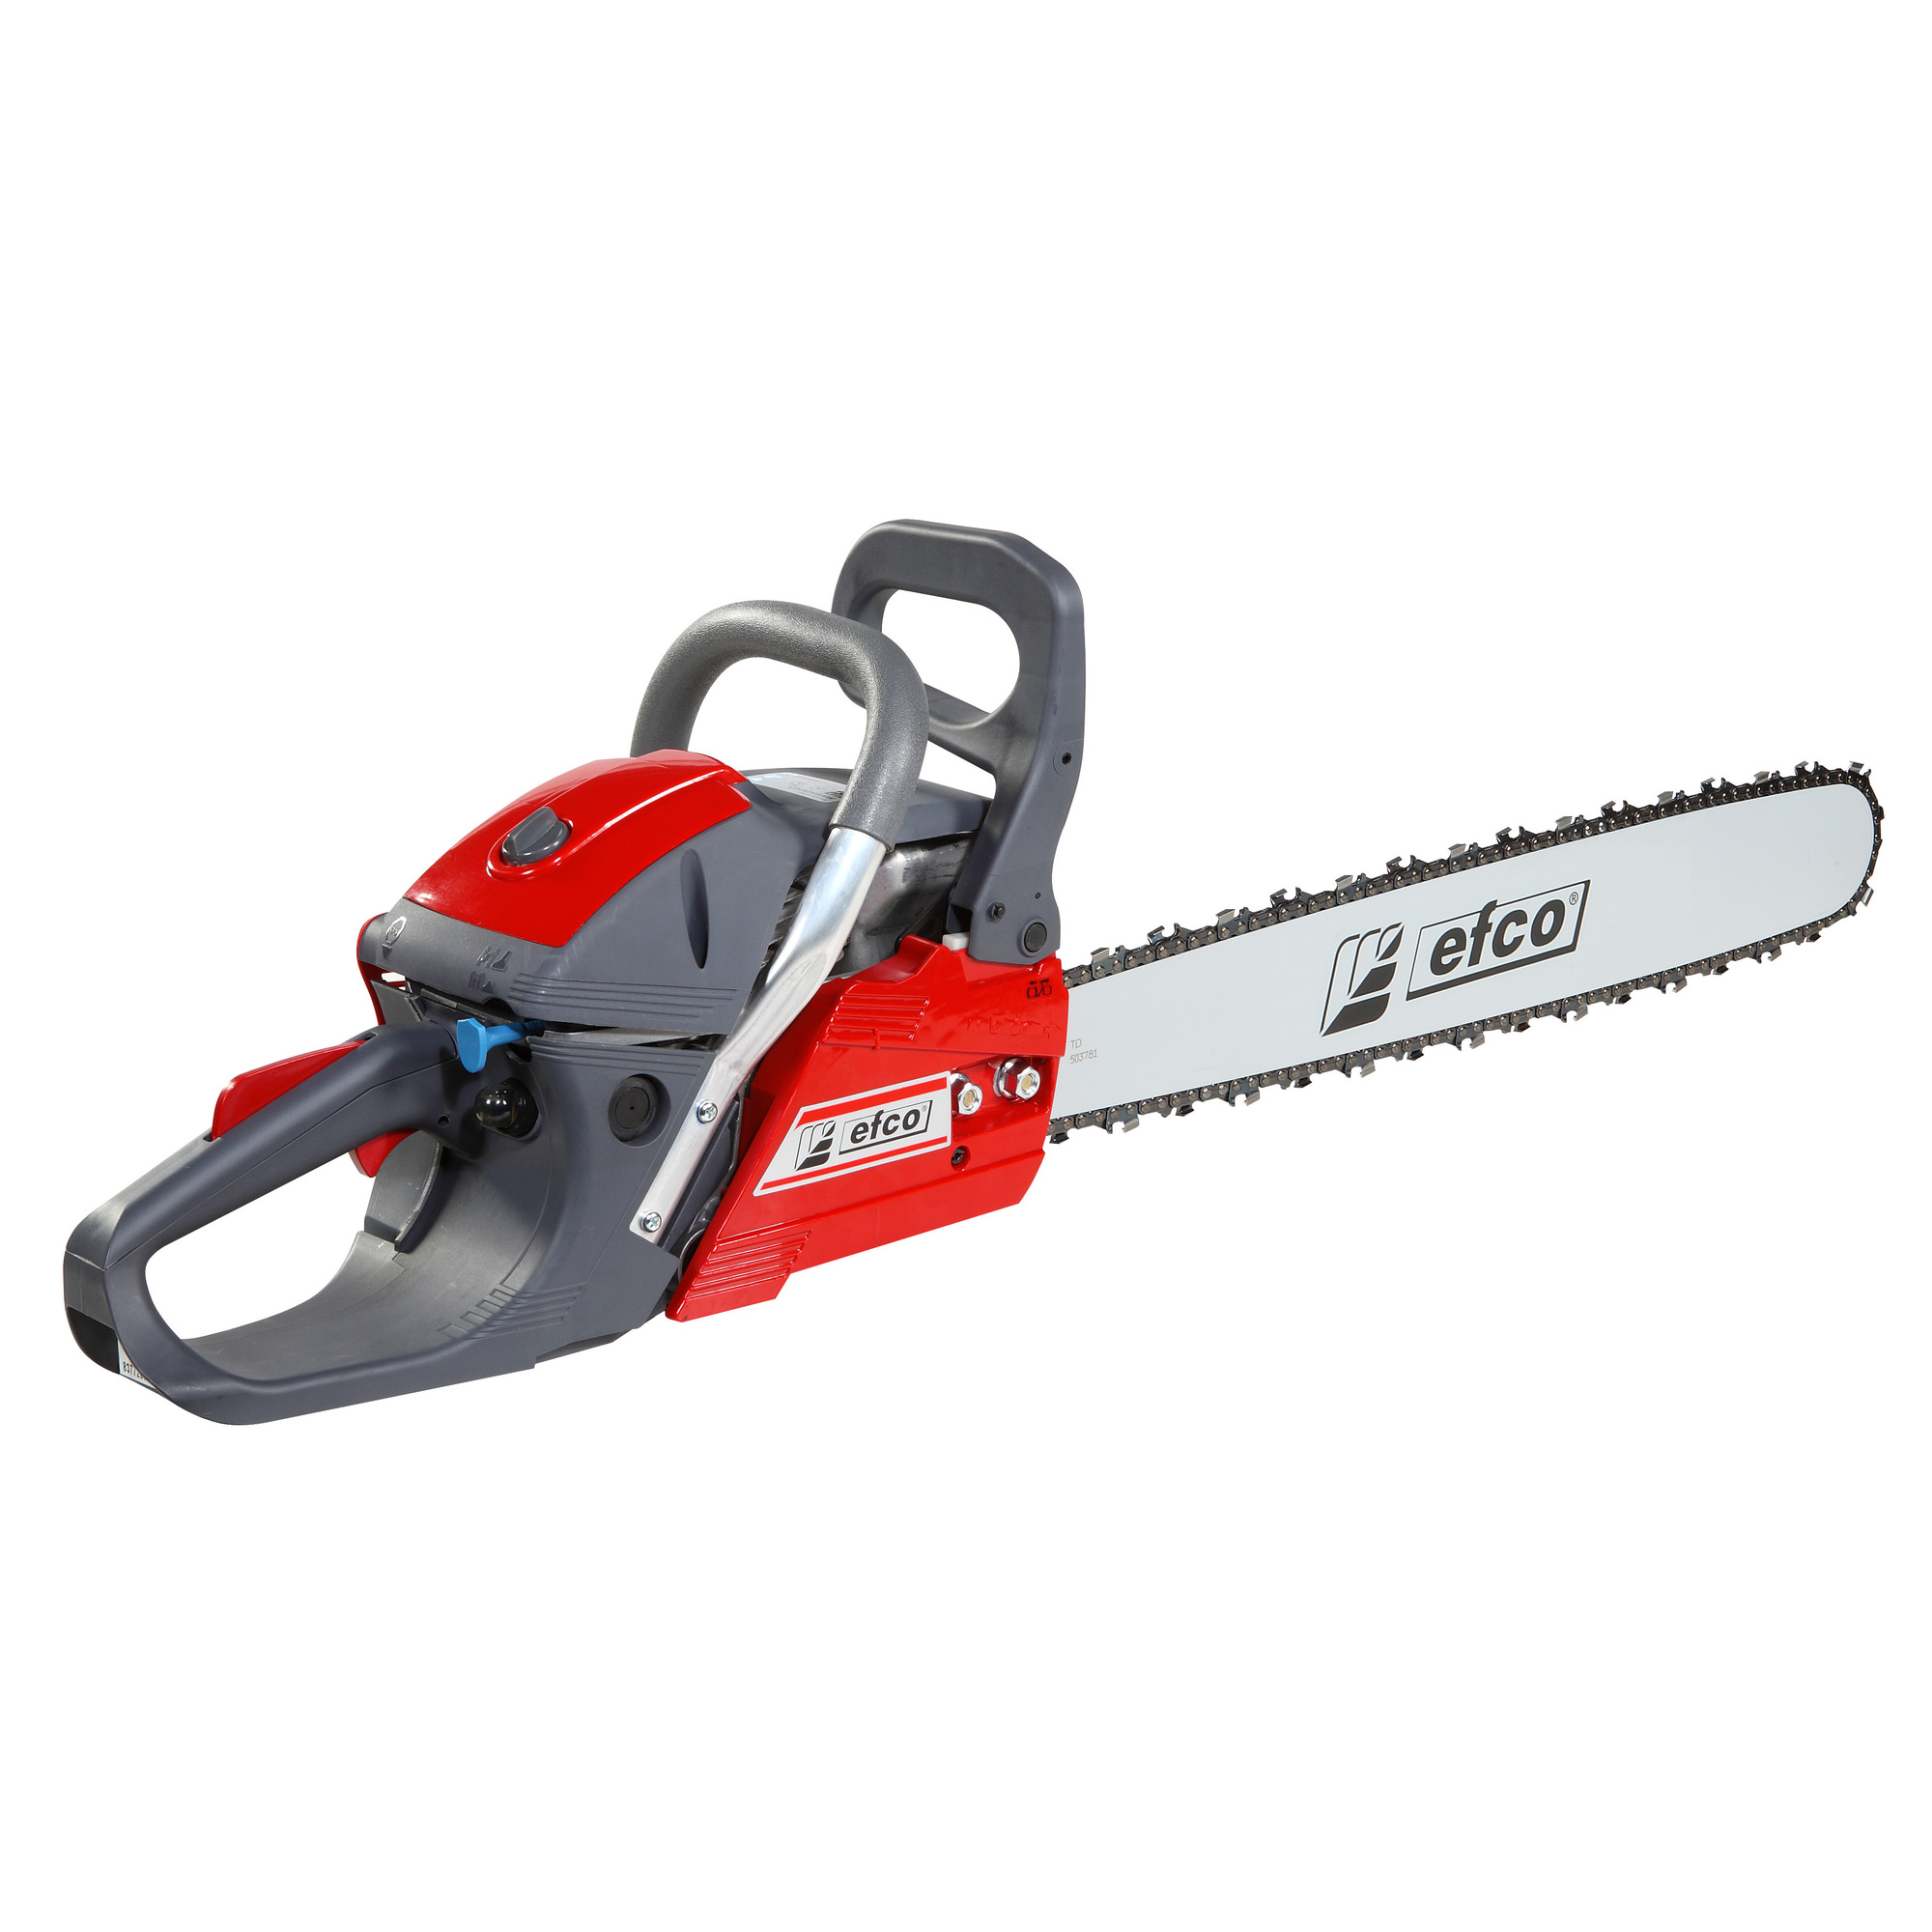 Efco, H-Series Gas Chainsaw, Bar Length 20 in, Engine Displacement 54.5 cc, Model MTH5600-20